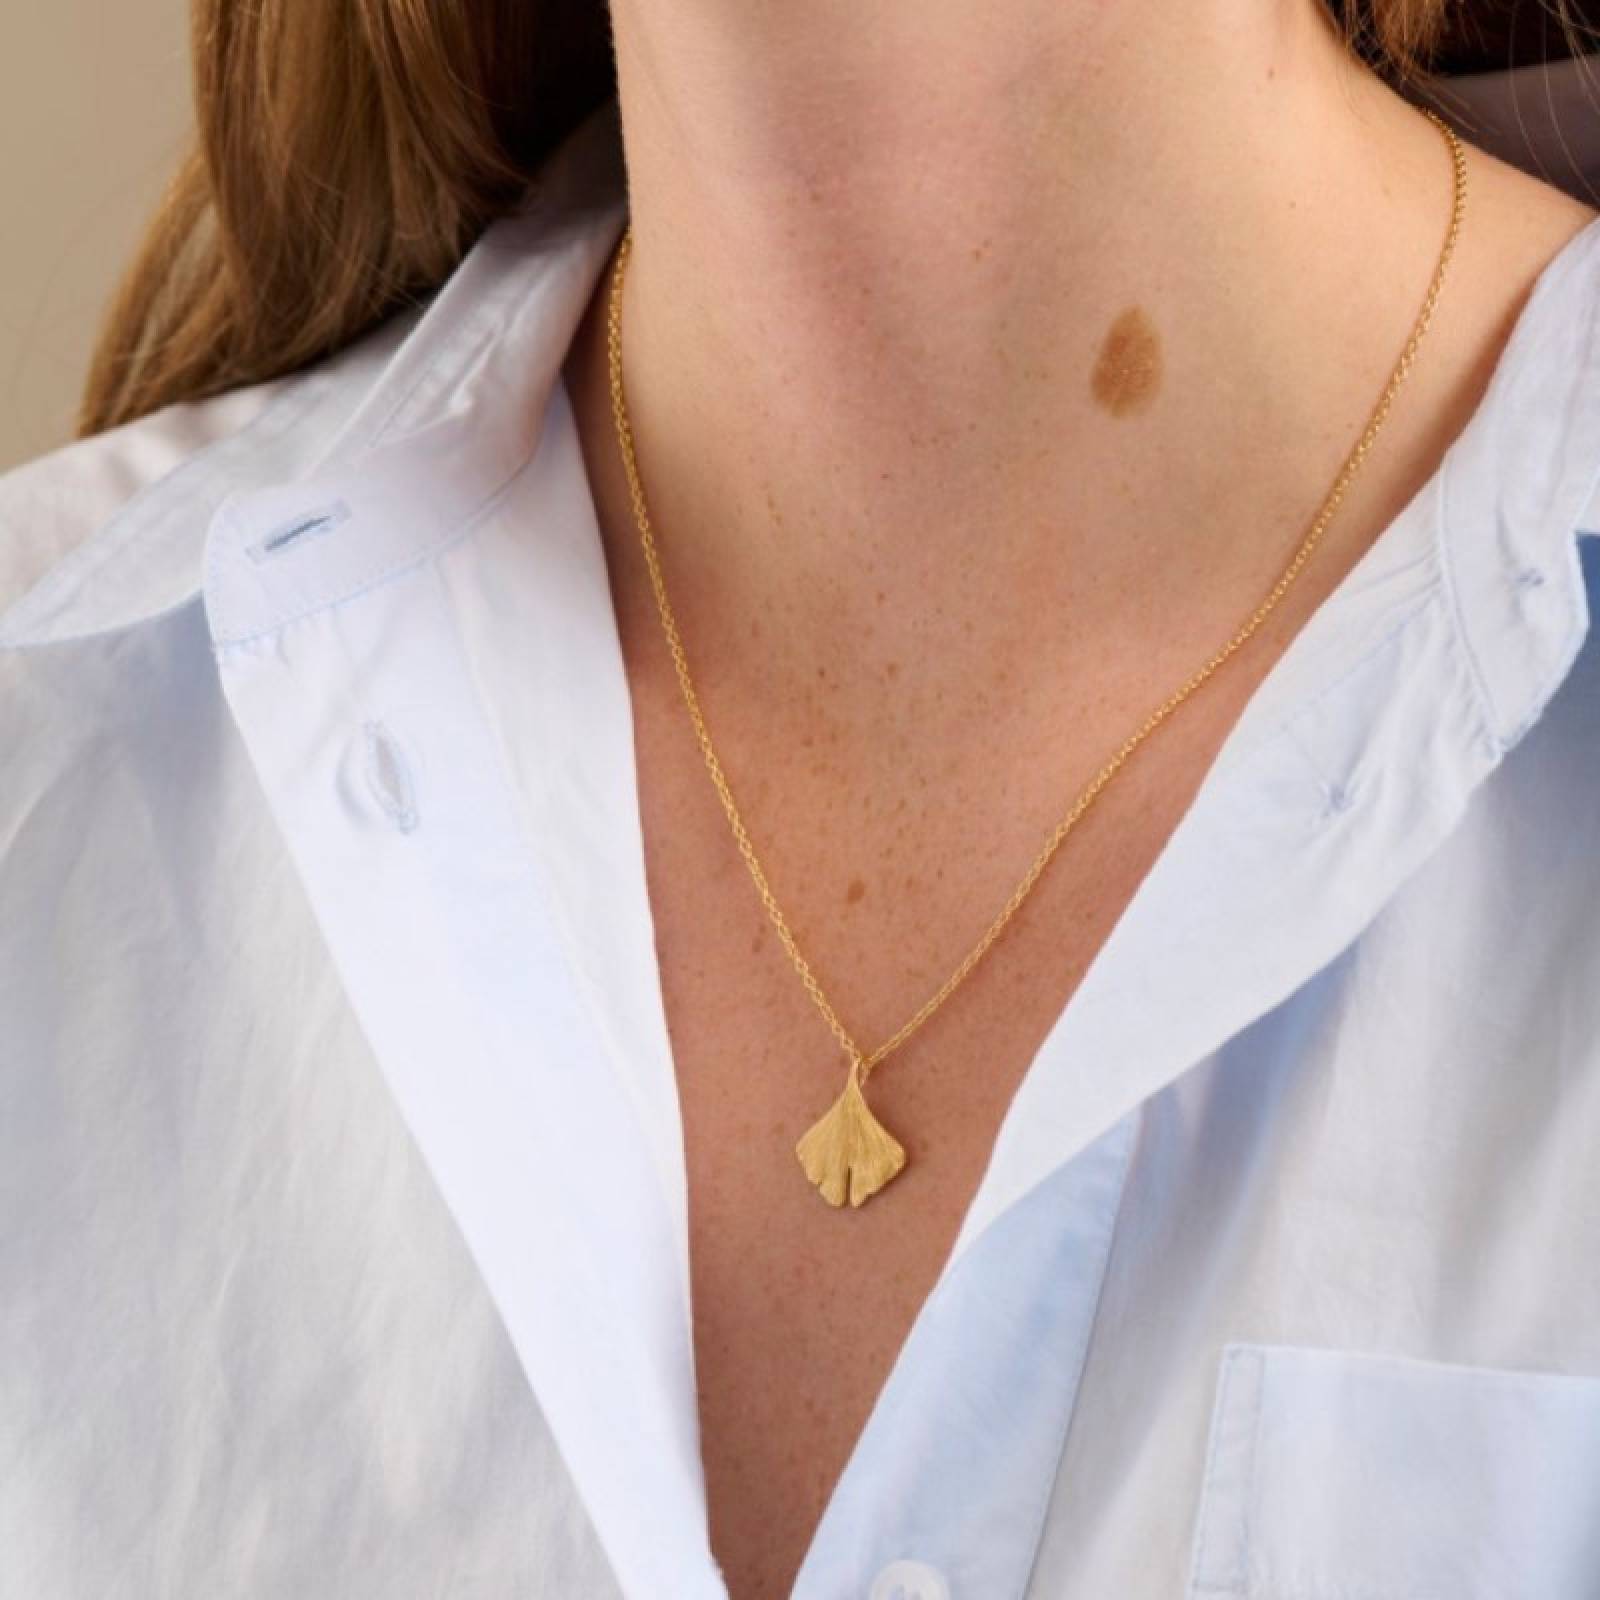 Biloba Necklace In Gold By Pernille Corydon thumbnails